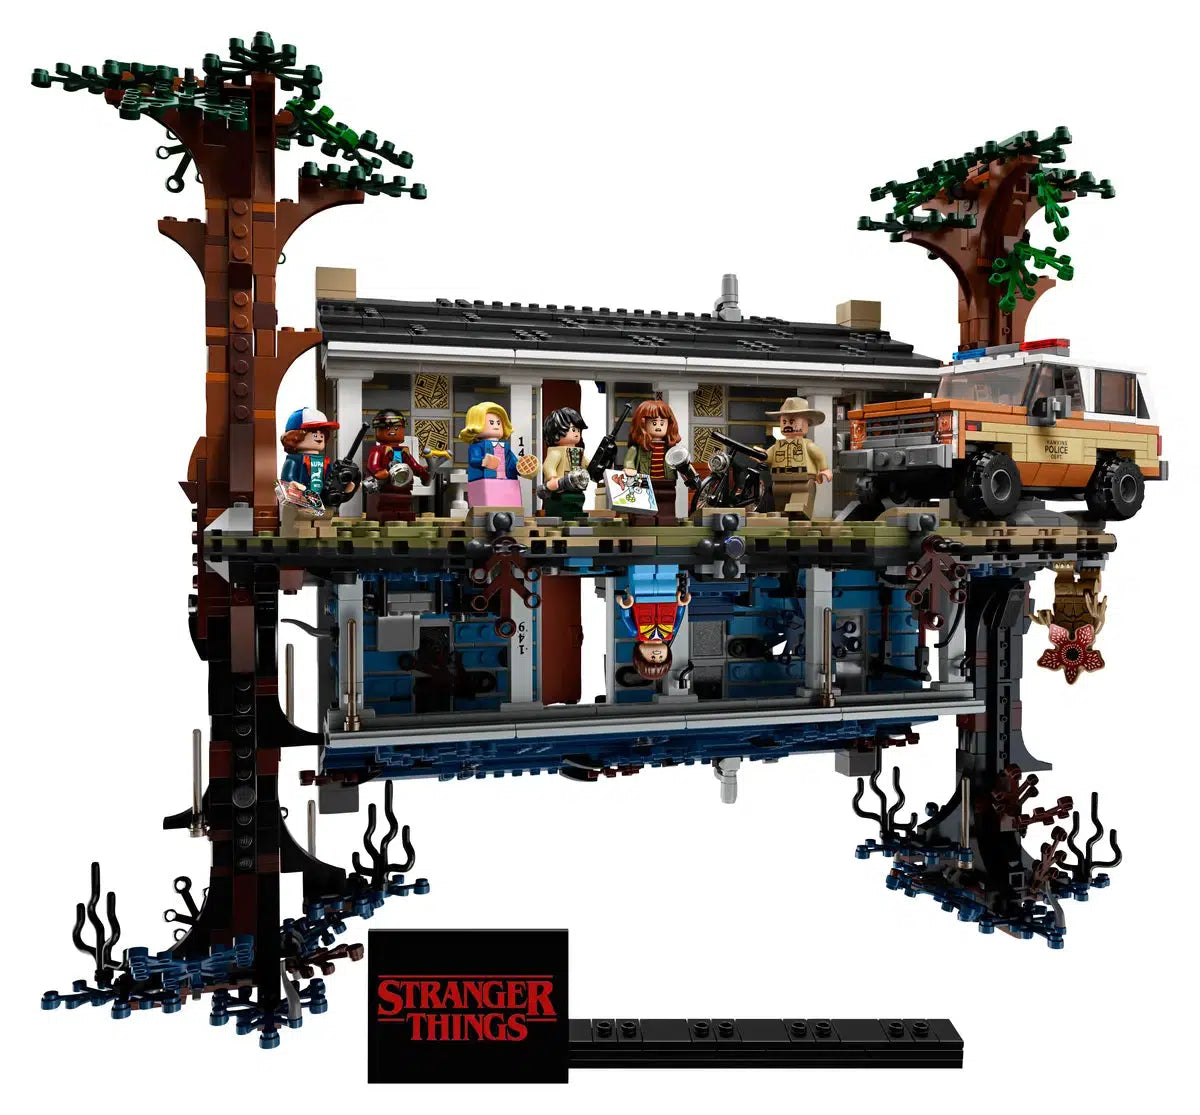 Will LEGO Continue to Expand the Stranger Things Collection?